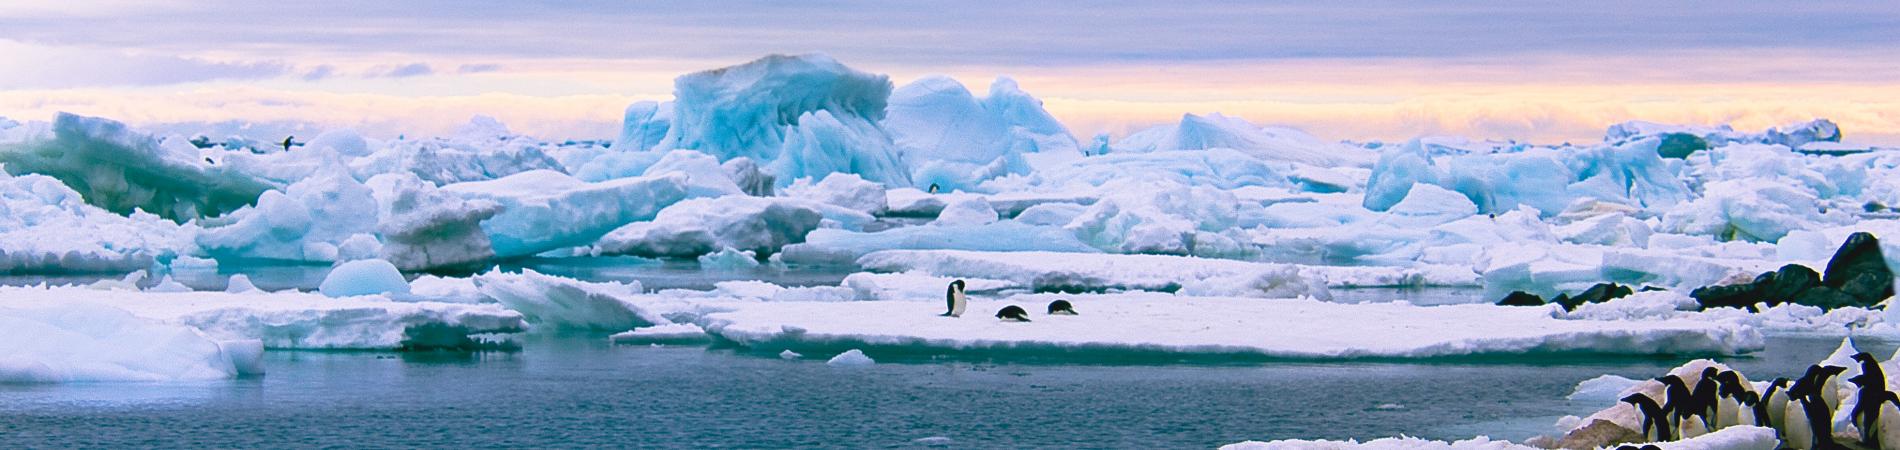 Image for Unusual holiday destinations: Antarctica and the Arctic